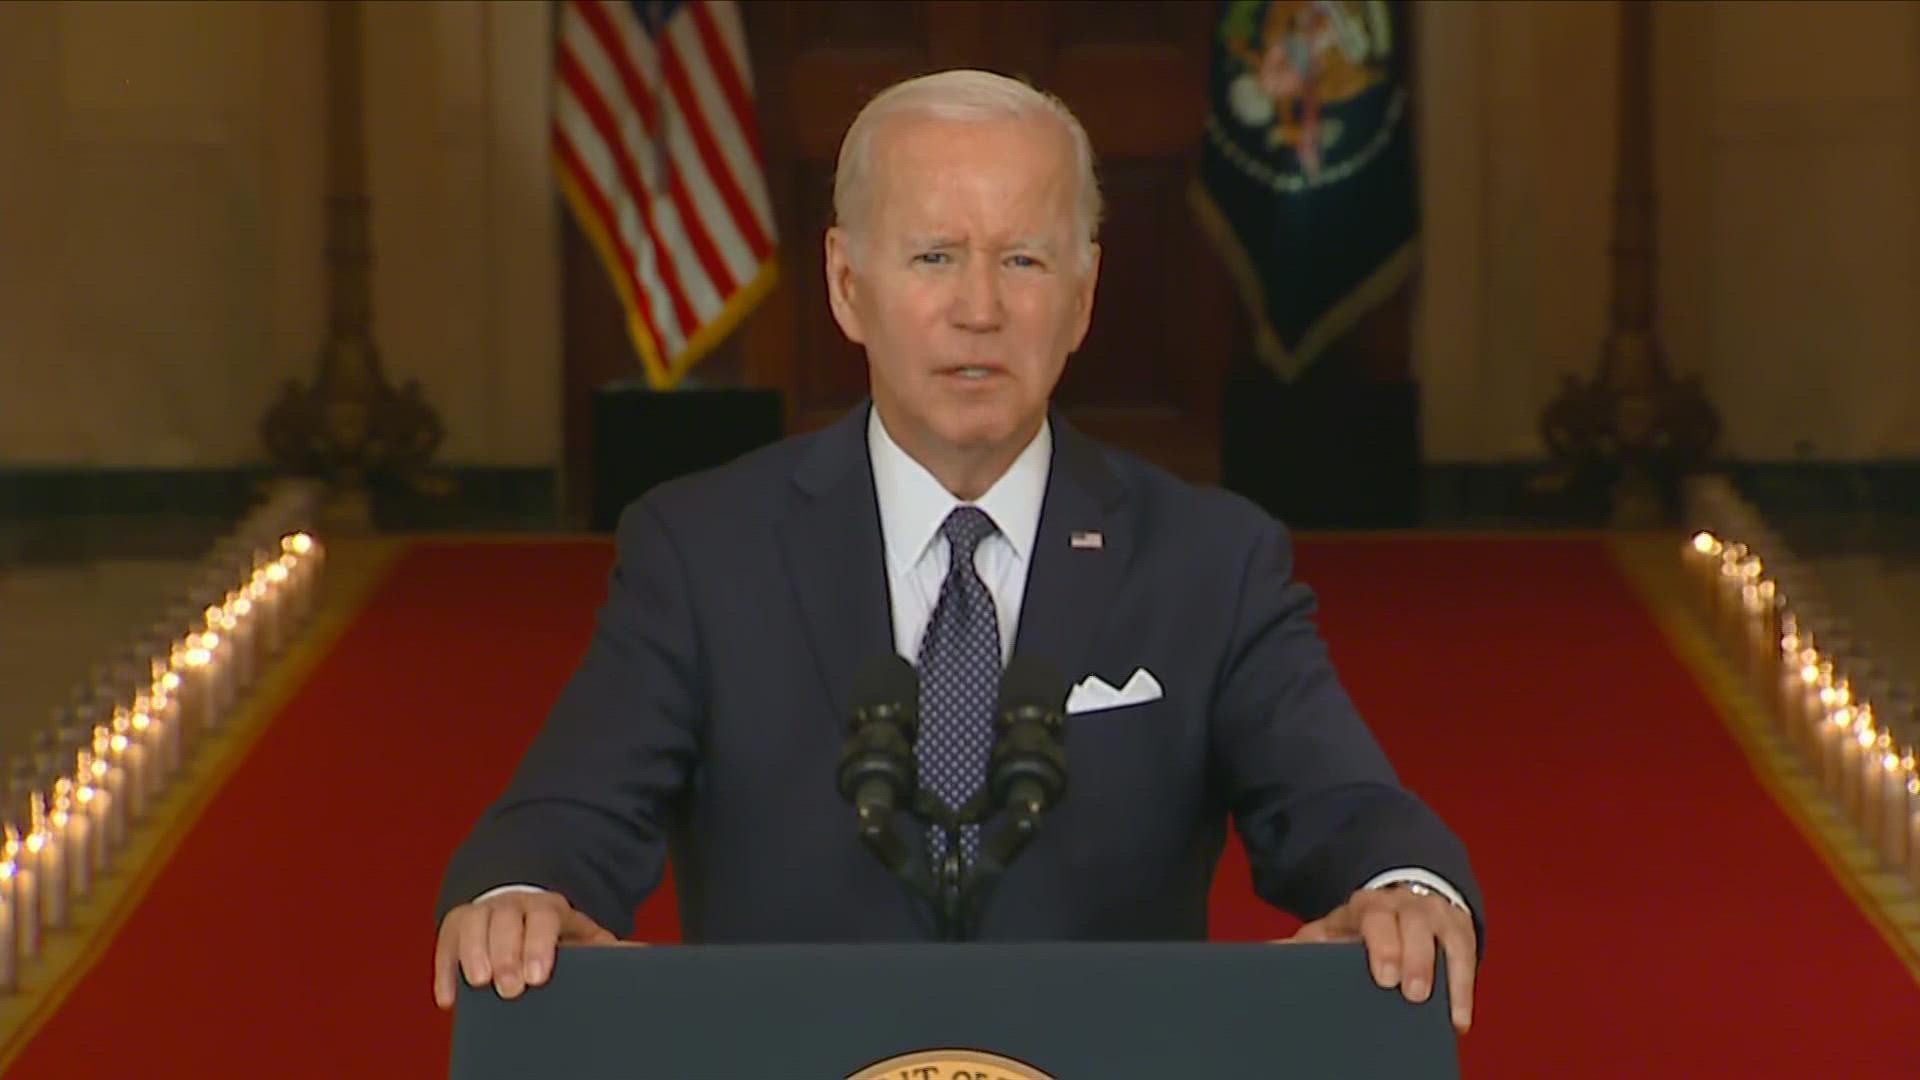 President Joe Biden called on Americans to meet the moment and "finally do something" in response to the latest mass shootings.